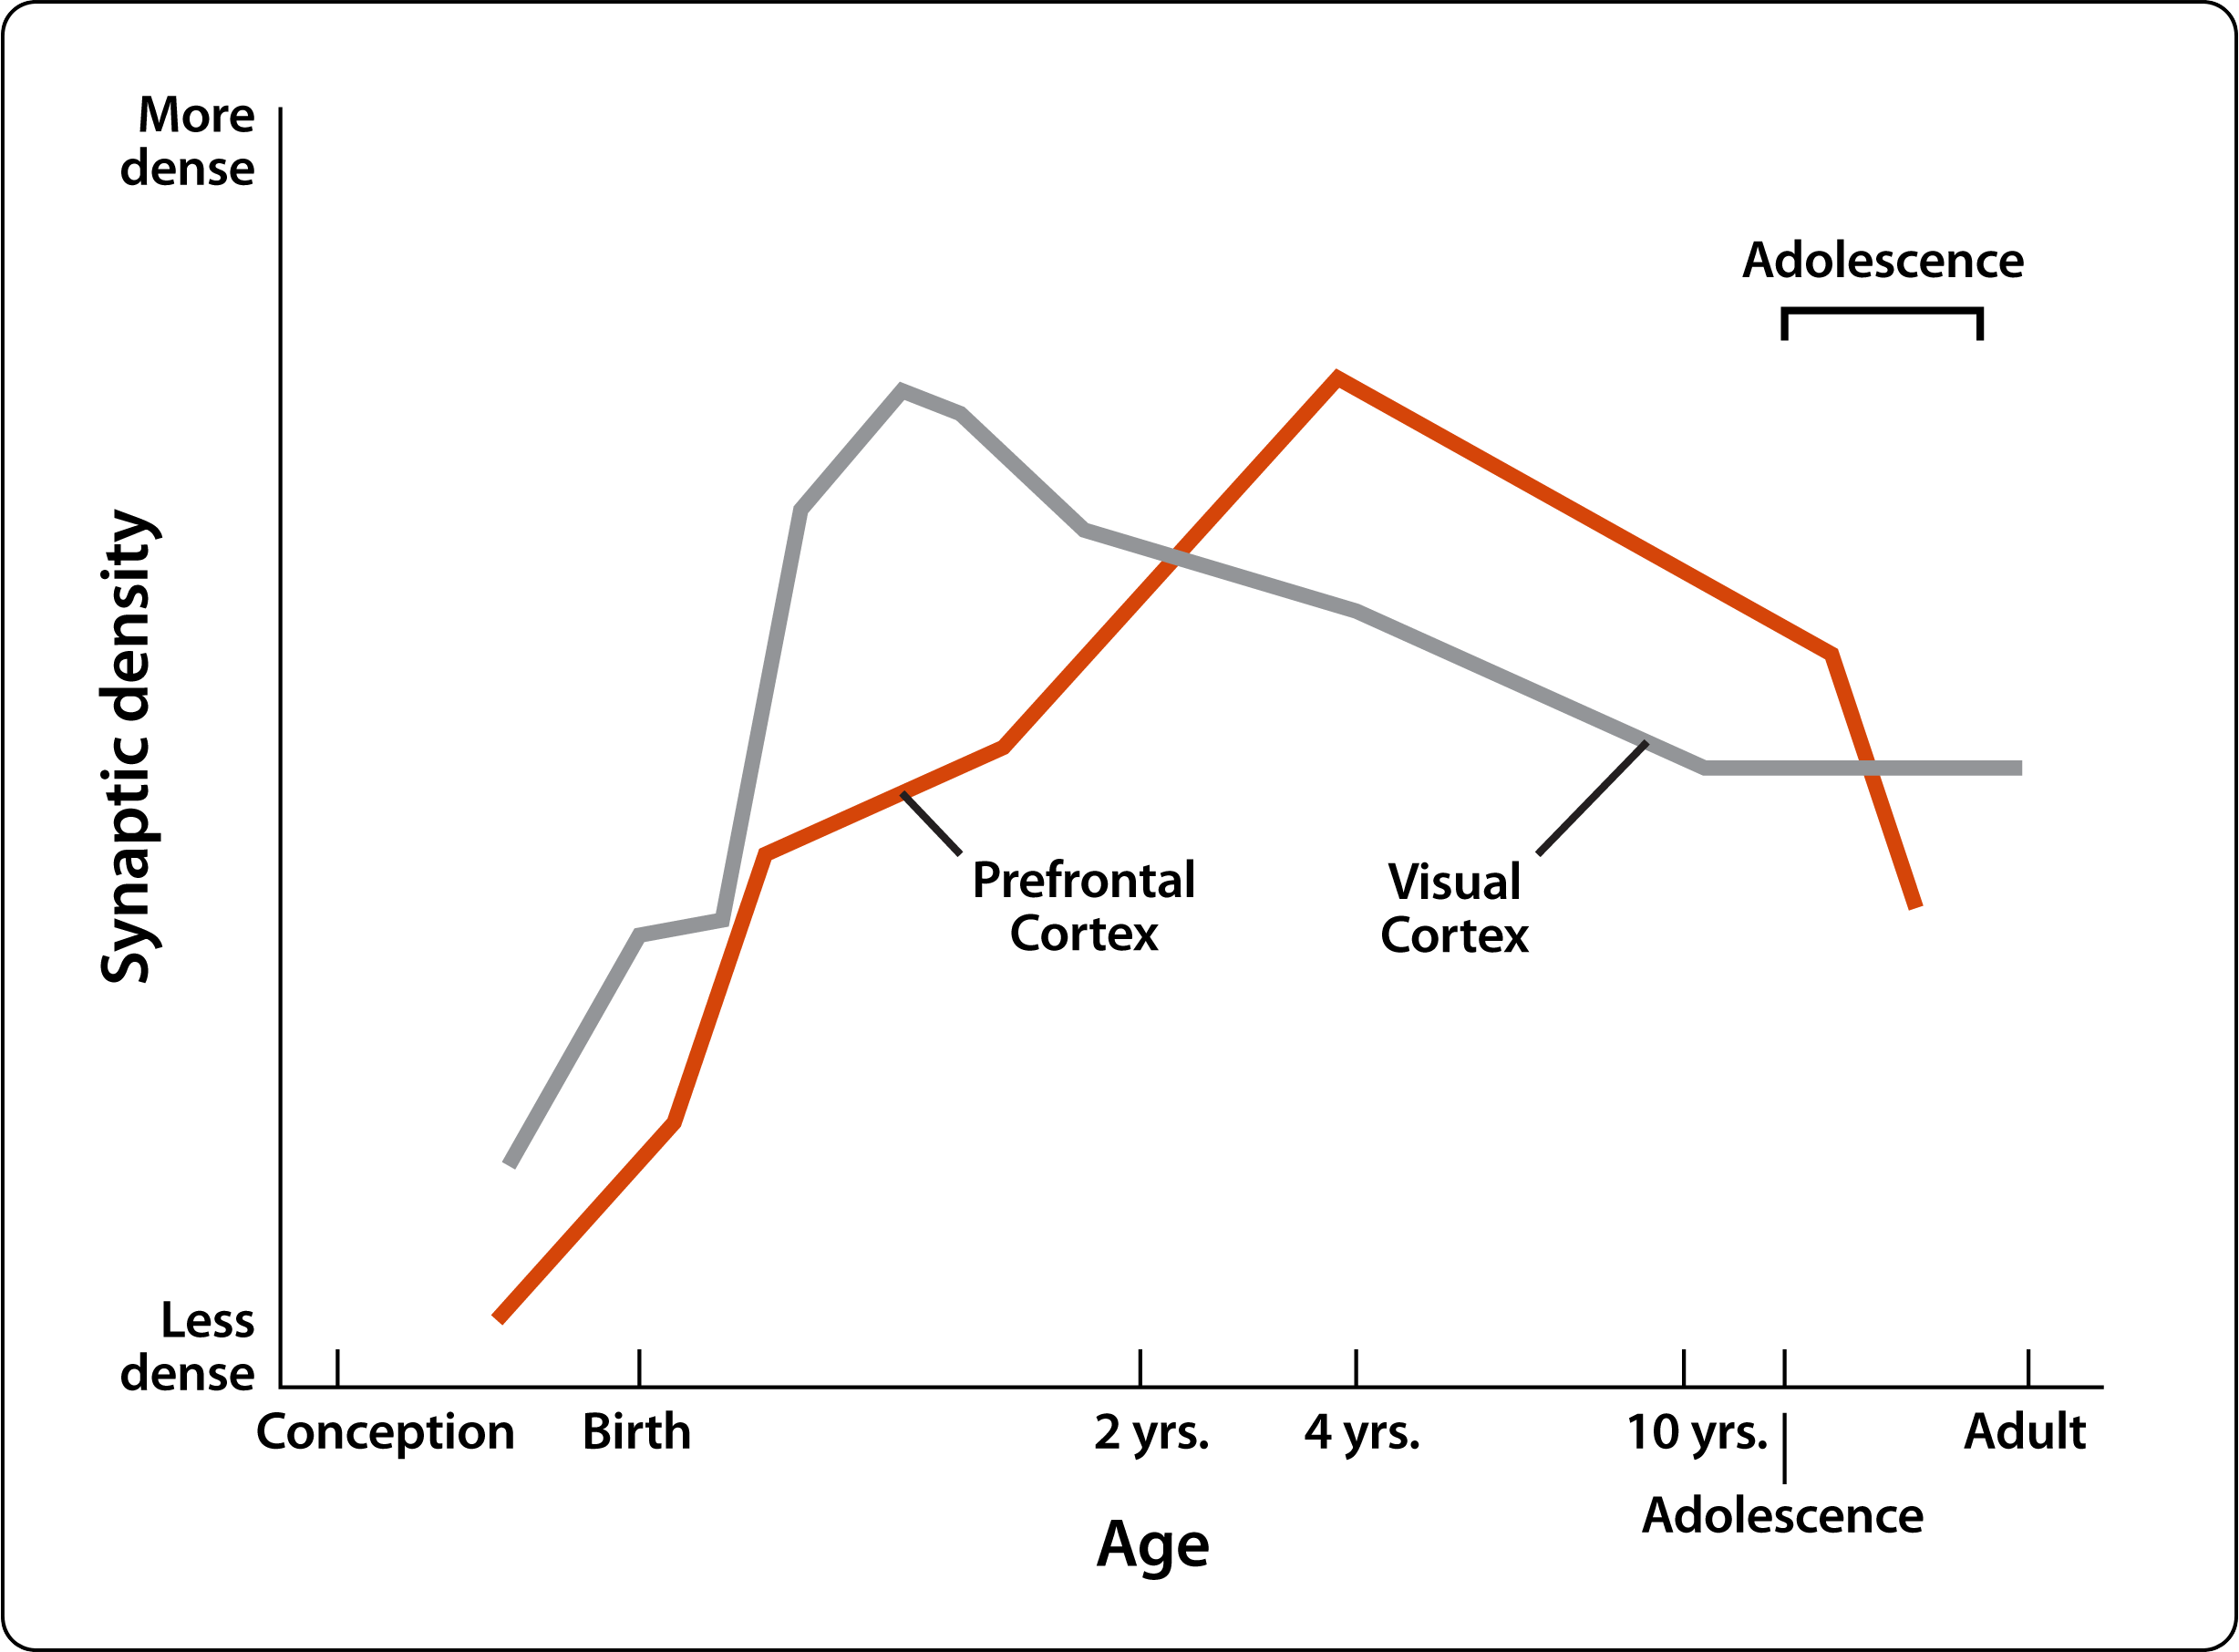 Graph showing the change in synaptic density over time for both the prefrontal cortex and visual cortex.  The synaptic density in the prefrontal cortex steadily climbs until about 4 years old and then makes a gradual decline into adolescence.  There is a steep decline in synaptic density between adolescence and adulthood.  The synaptic density in the visual cortex climbs steeply from birth until the first year of life.  Then, the synaptic density makes a gradual decline from one year old into adulthood.